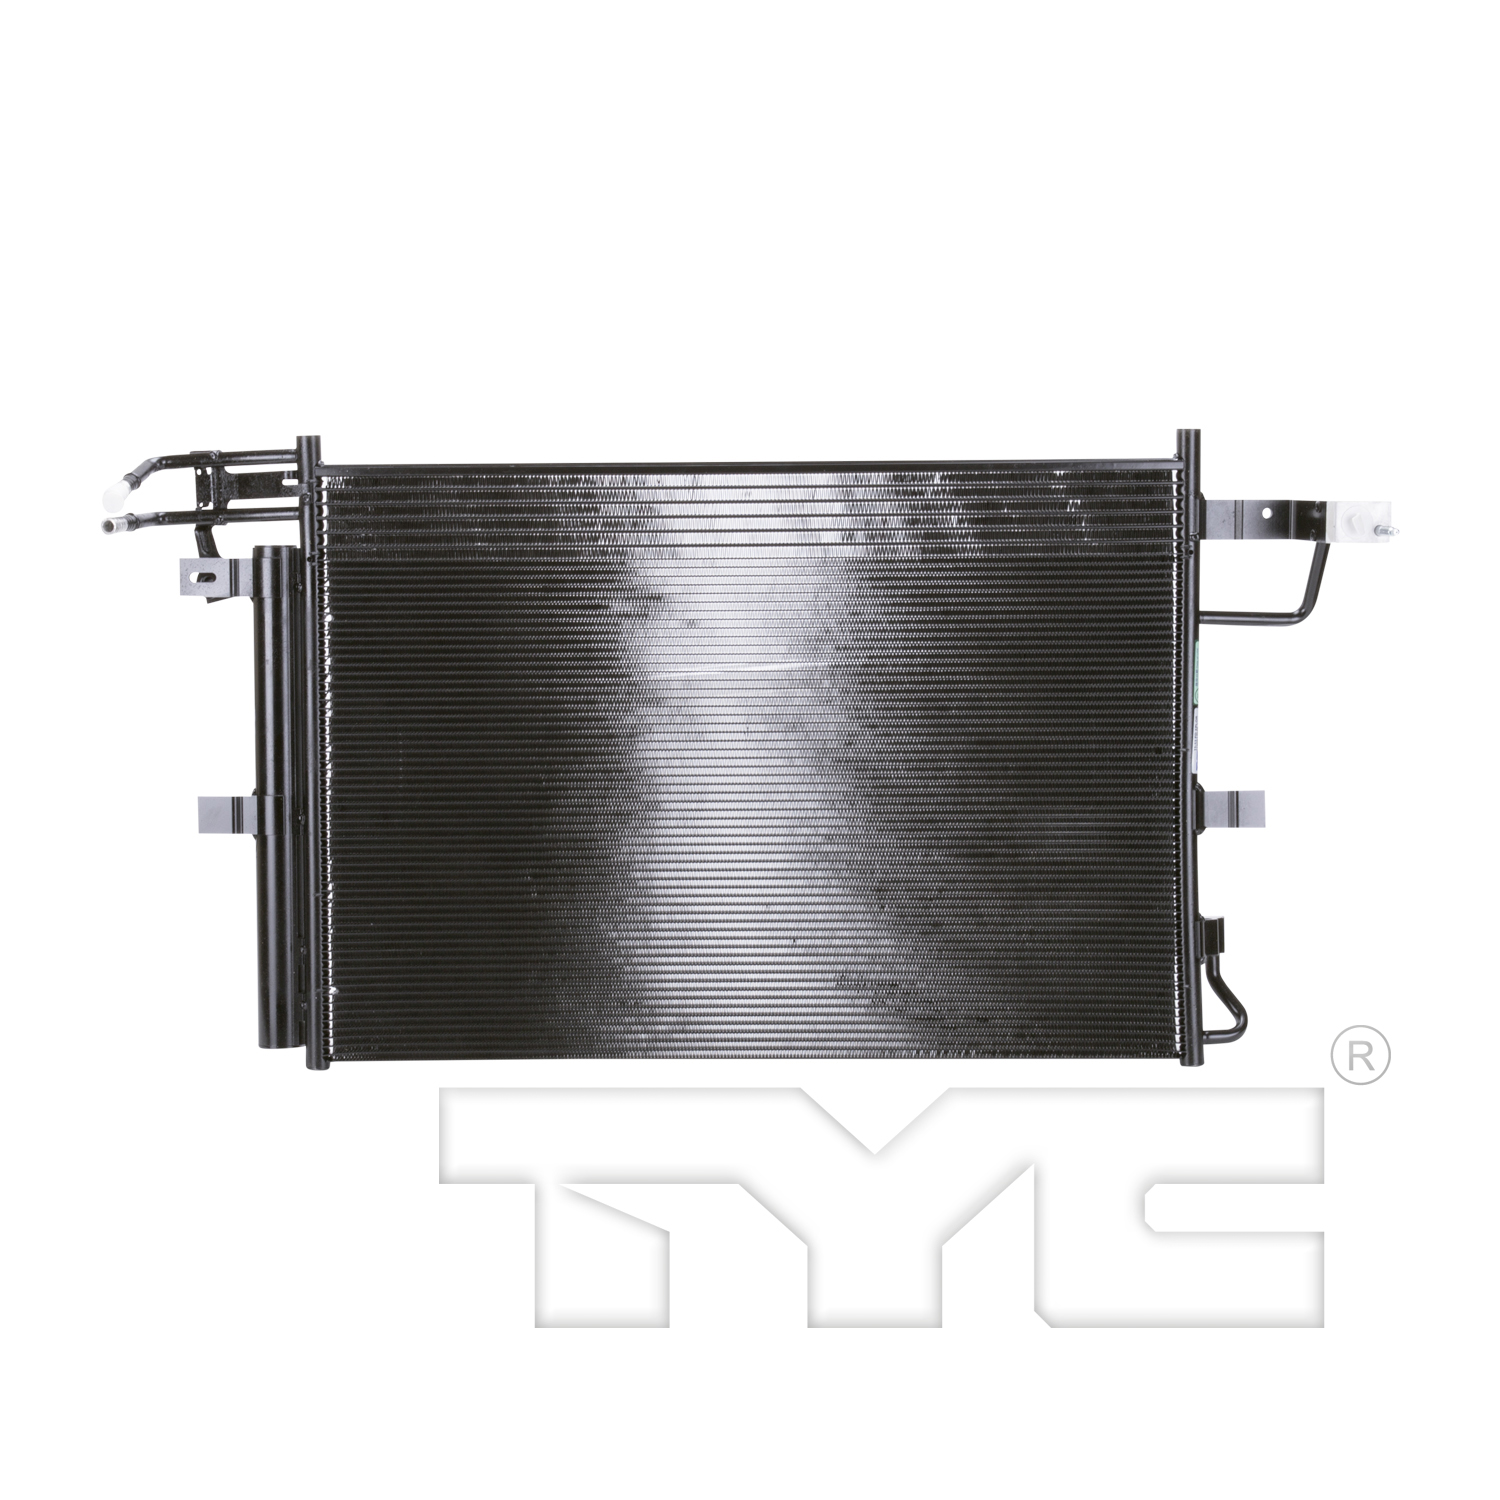 Aftermarket AC CONDENSERS for FORD - EXPLORER, EXPLORER,11-15,Air conditioning condenser